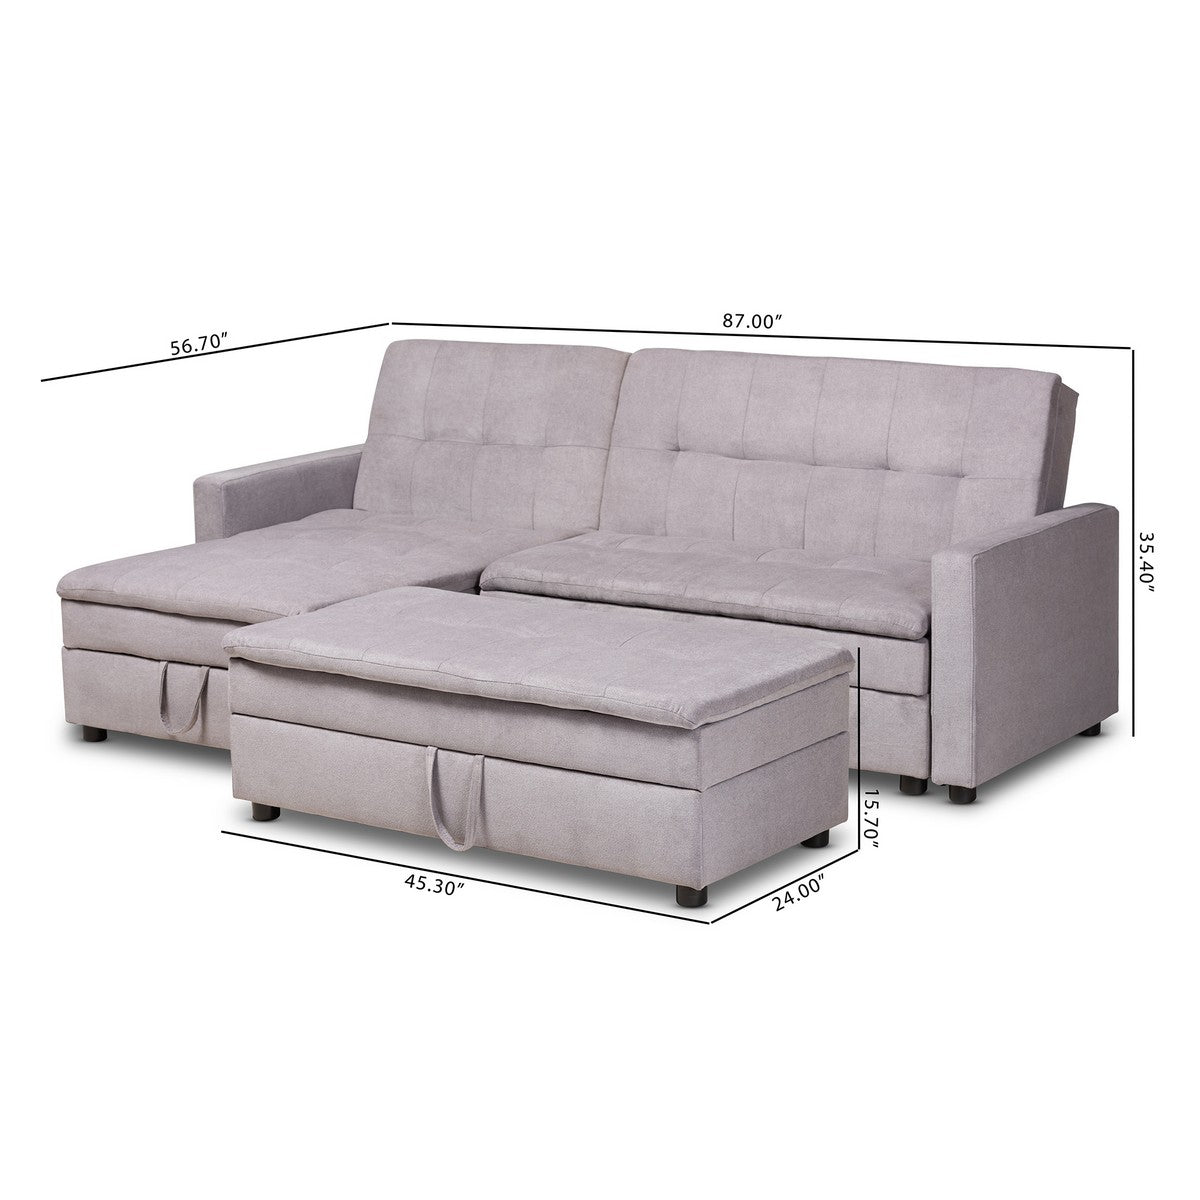 Baxton Studio Noa Modern and Contemporary Light Grey Fabric Upholstered Left Facing Storage Sectional Sleeper Sofa with Ottoman